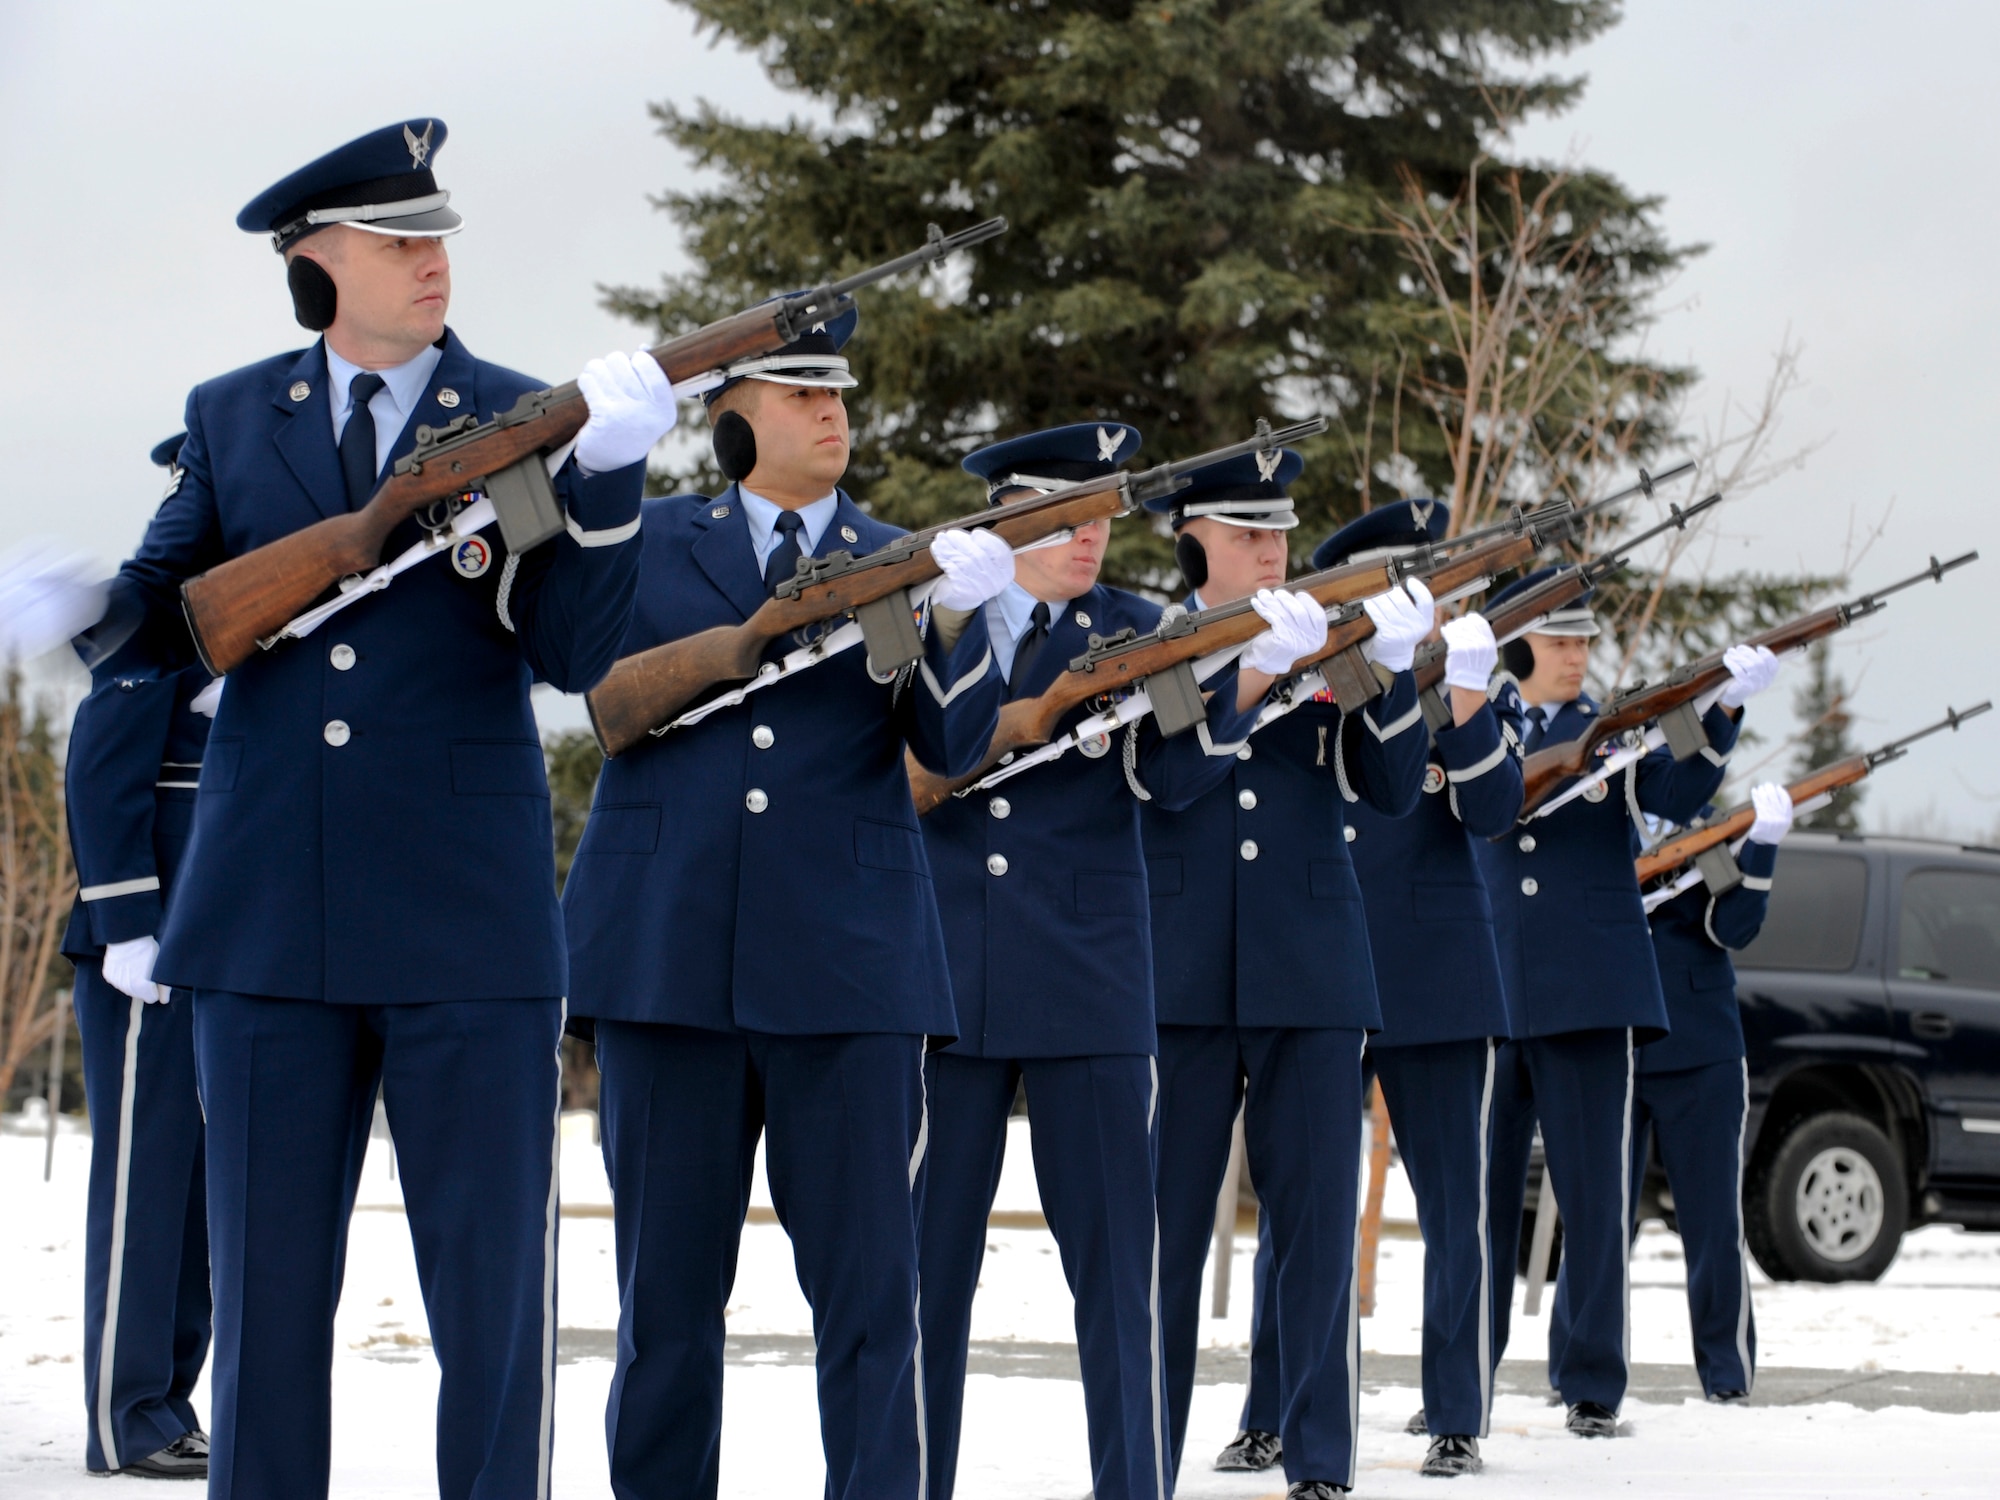 FORT RICHARDSON, Alaska -- The Elmendorf Honor Guard executes a 21-gun salute for fallen servicemembers during the Veterans Day Memorial Ceremony at Fort Richardson National Cemetery Nov. 11. The ceremony commemorated all those who paid the ultimate sacrifice for their country as well as those who are still fighting for their country. Air Force alongside Army and Canadian forces were present for the ceremony. (U.S. Air Force Photo/Staff Sgt. Joshua Garcia)